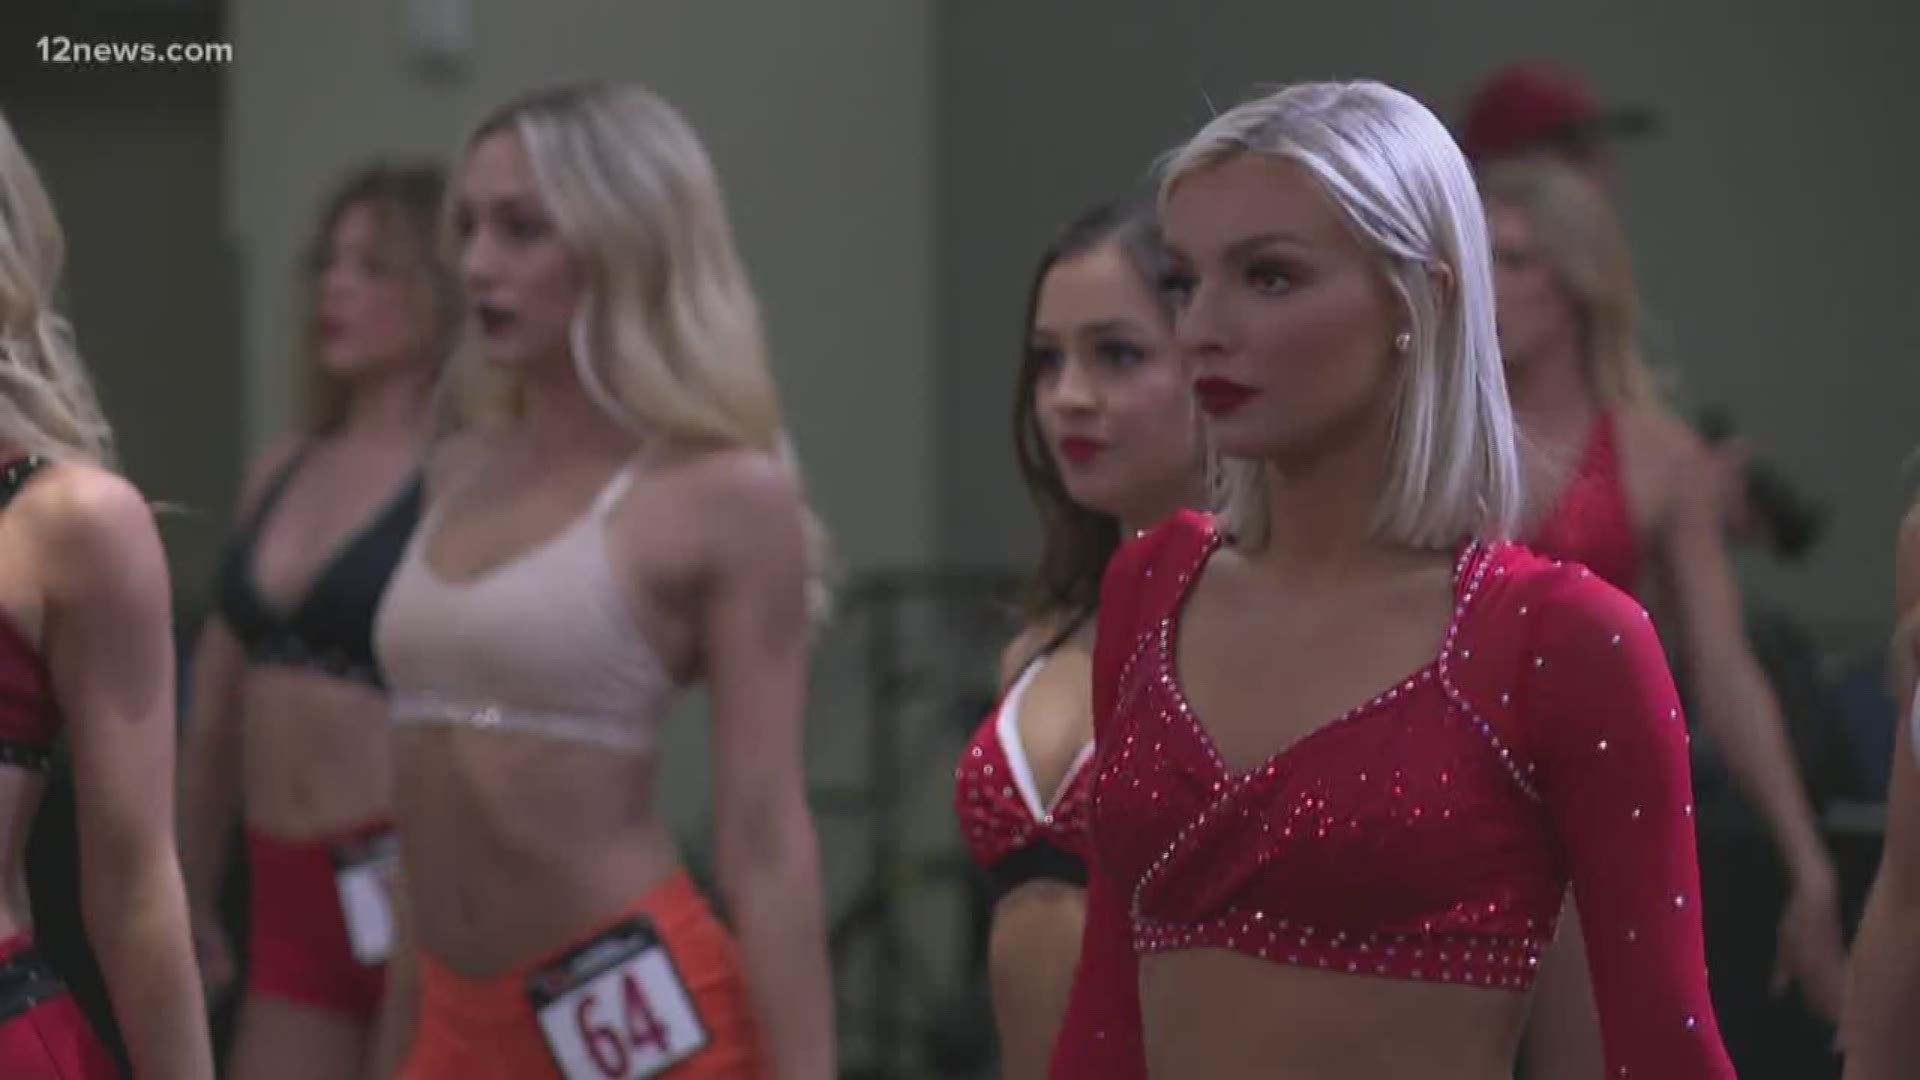 It was the semi-final round in the Cardinals cheerleader auditions. The new director wants to encourage the women who were cut to try again and continue to follow their dreams.